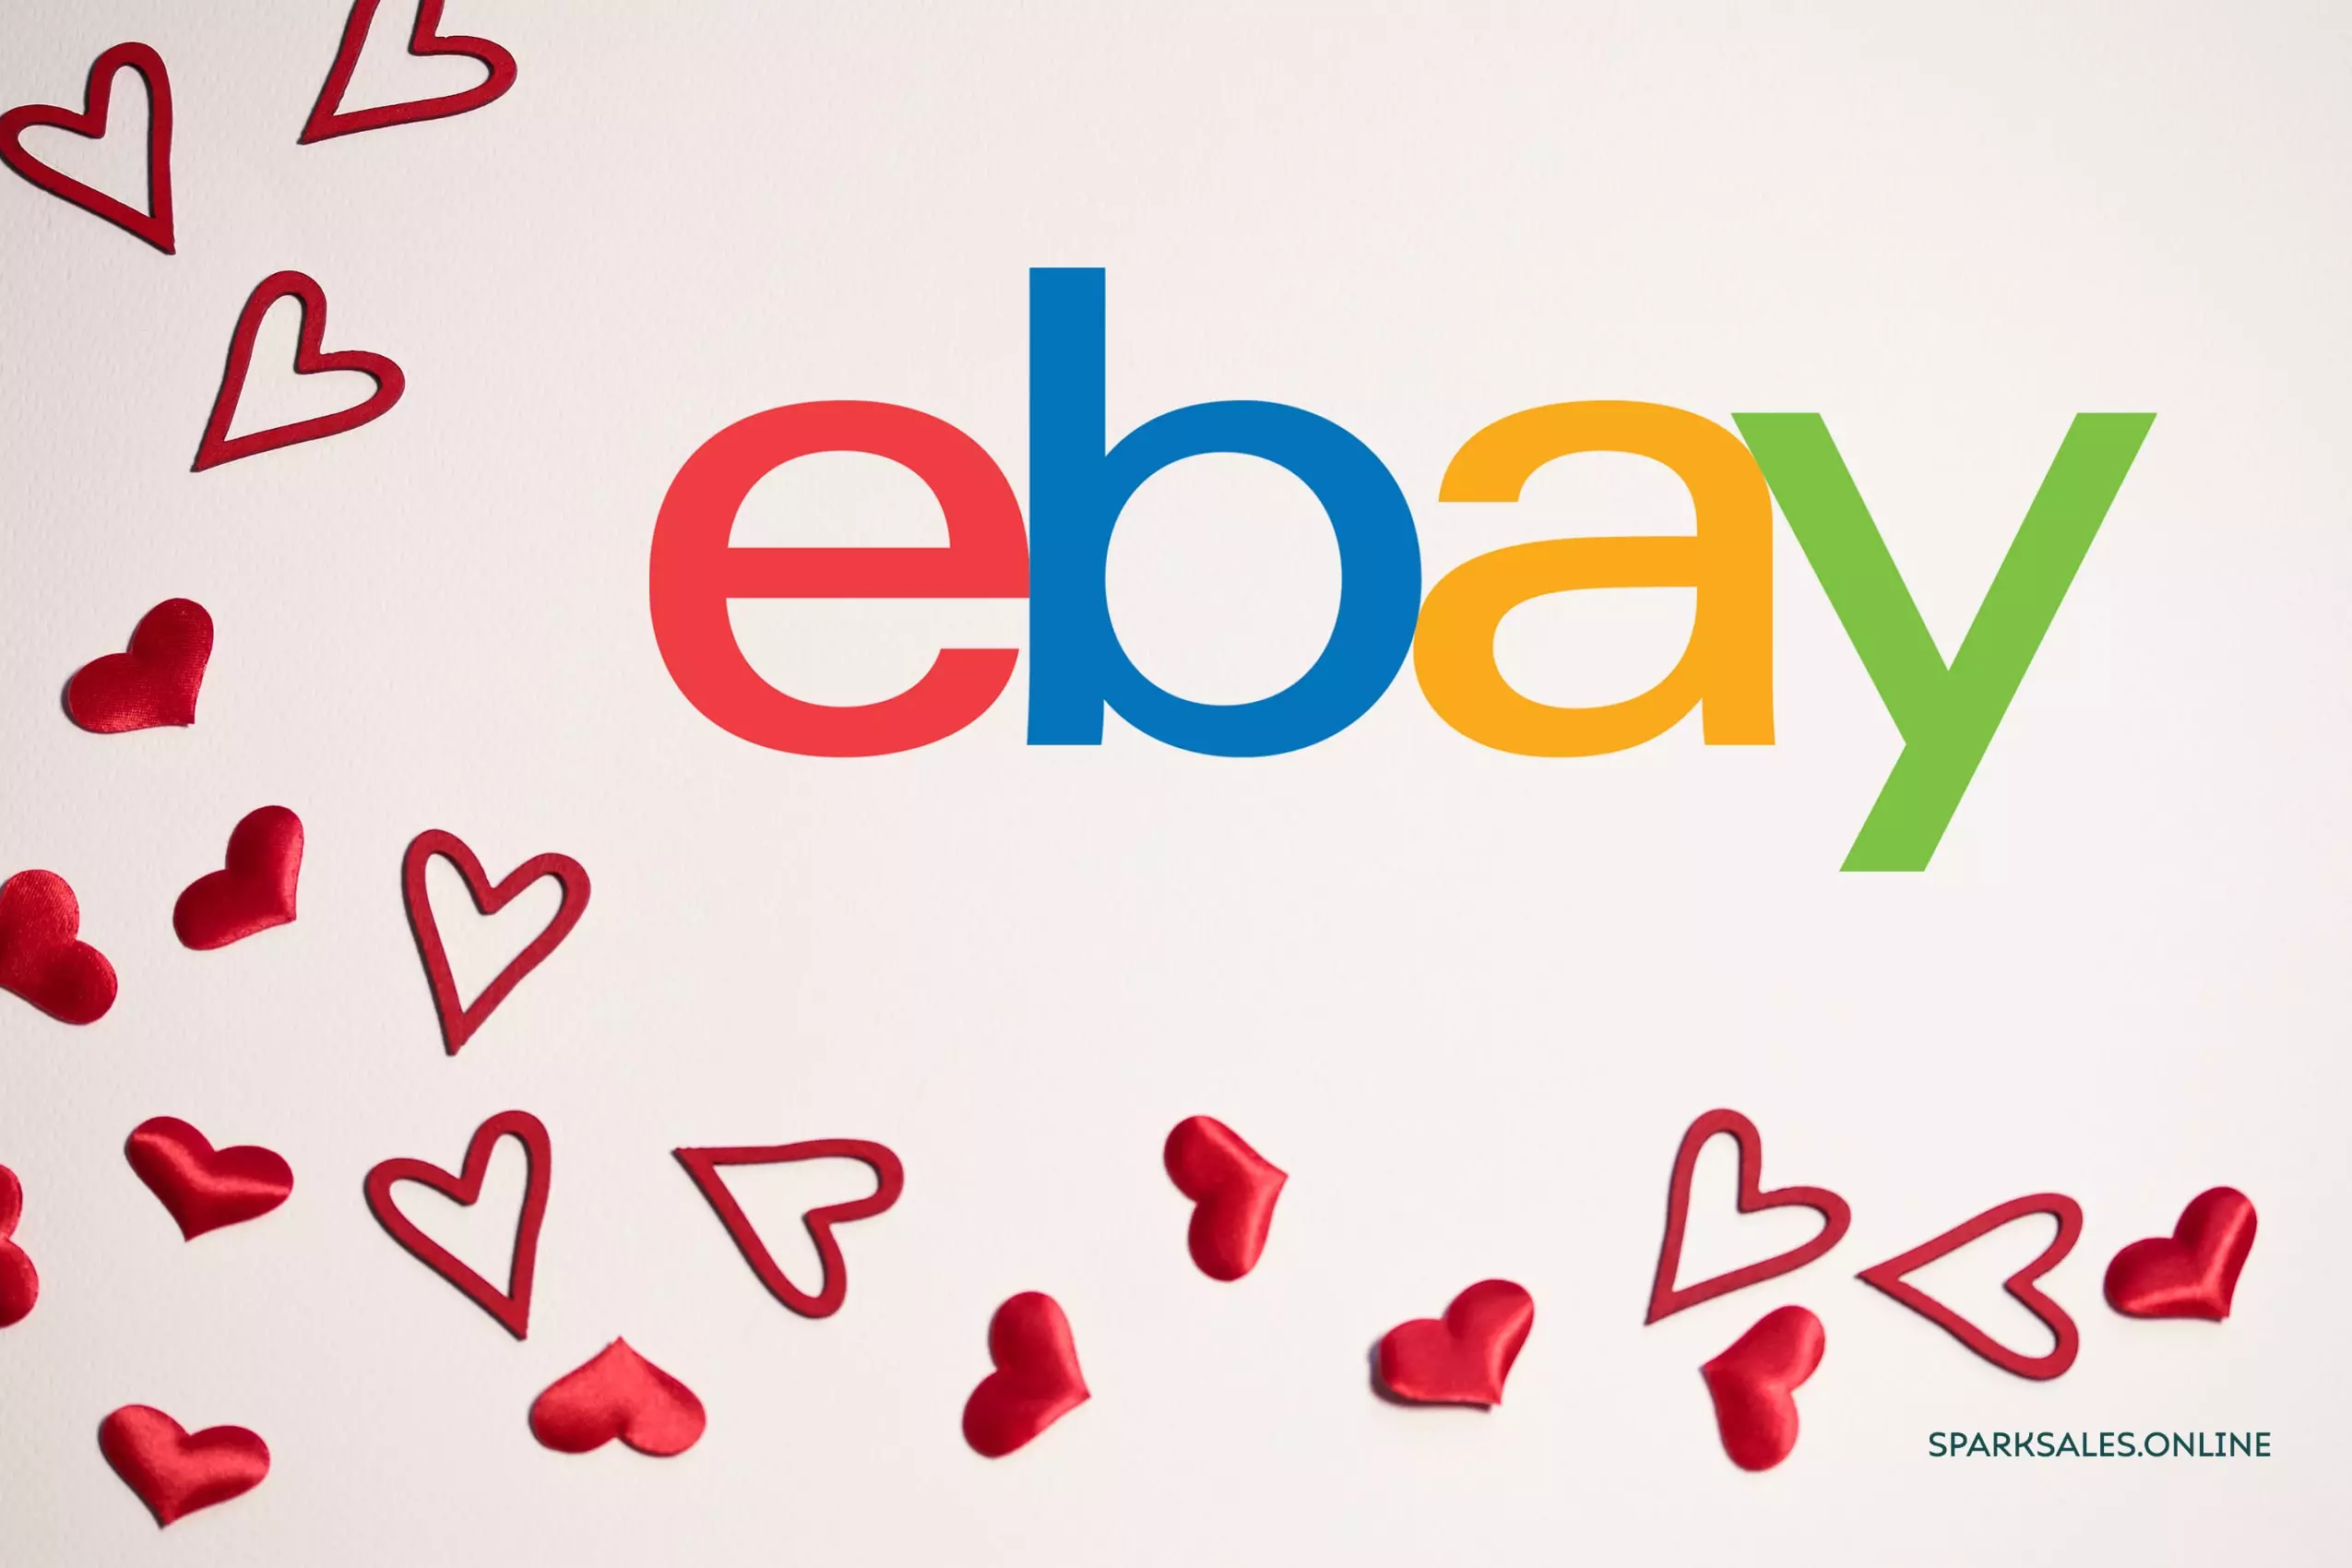 How do you know if the eBay marketplace will love that product too?